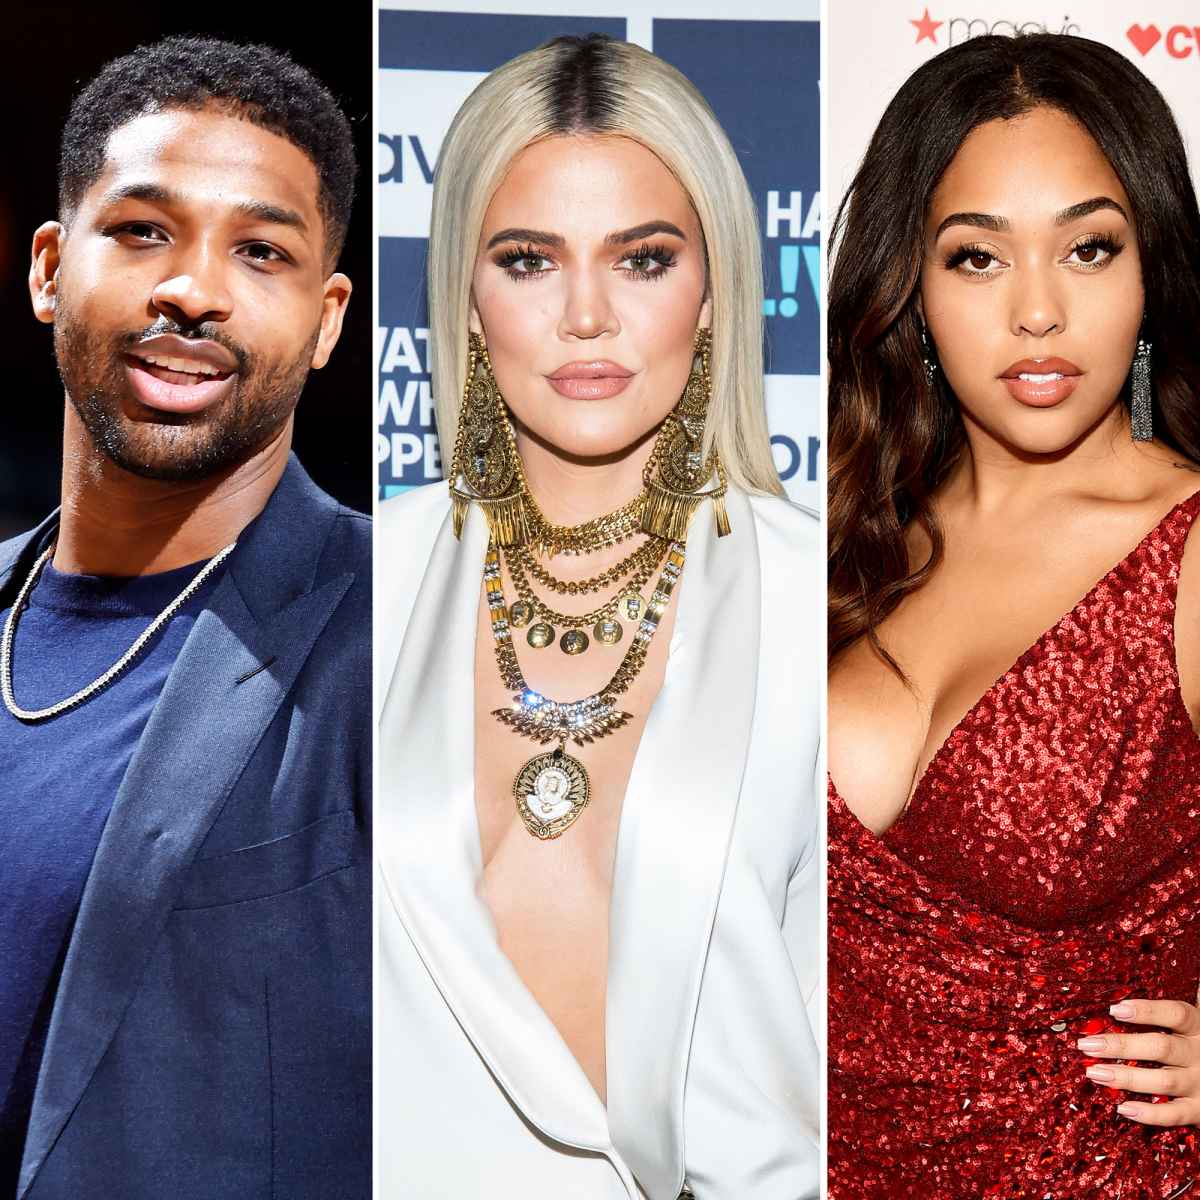 Kylie Jenner Is 'Open' But 'Cautious' About Reconciling With Jordyn Woods,  Source Says